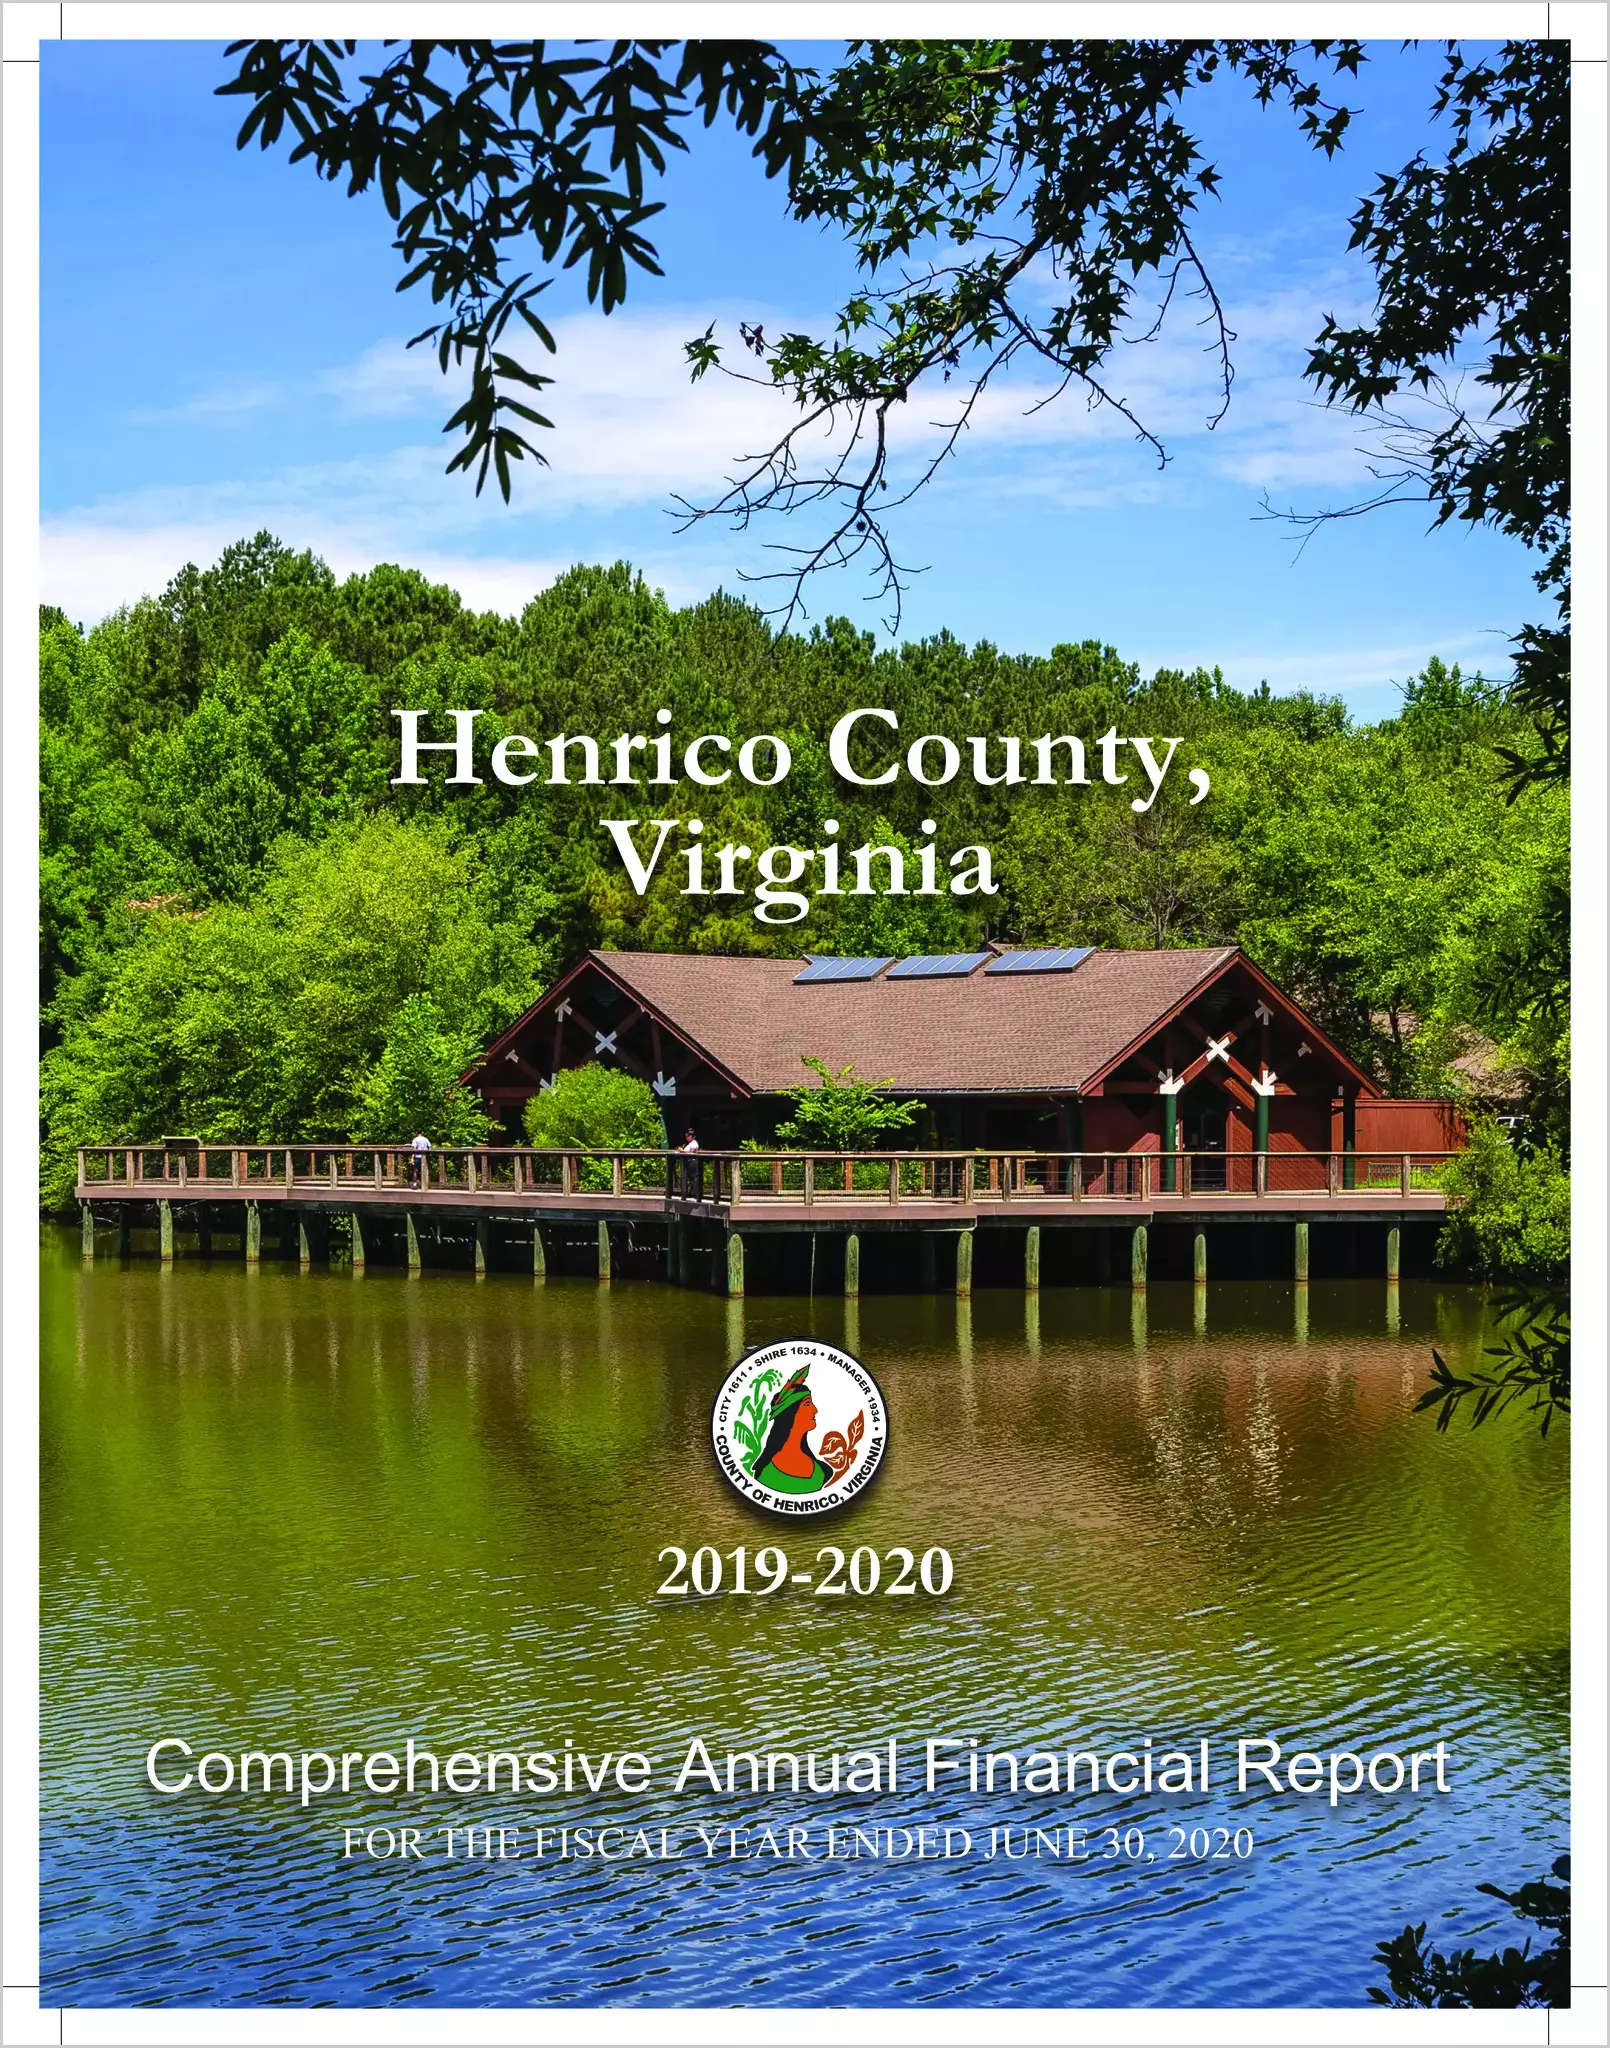 2020 Annual Financial Report for County of Henrico